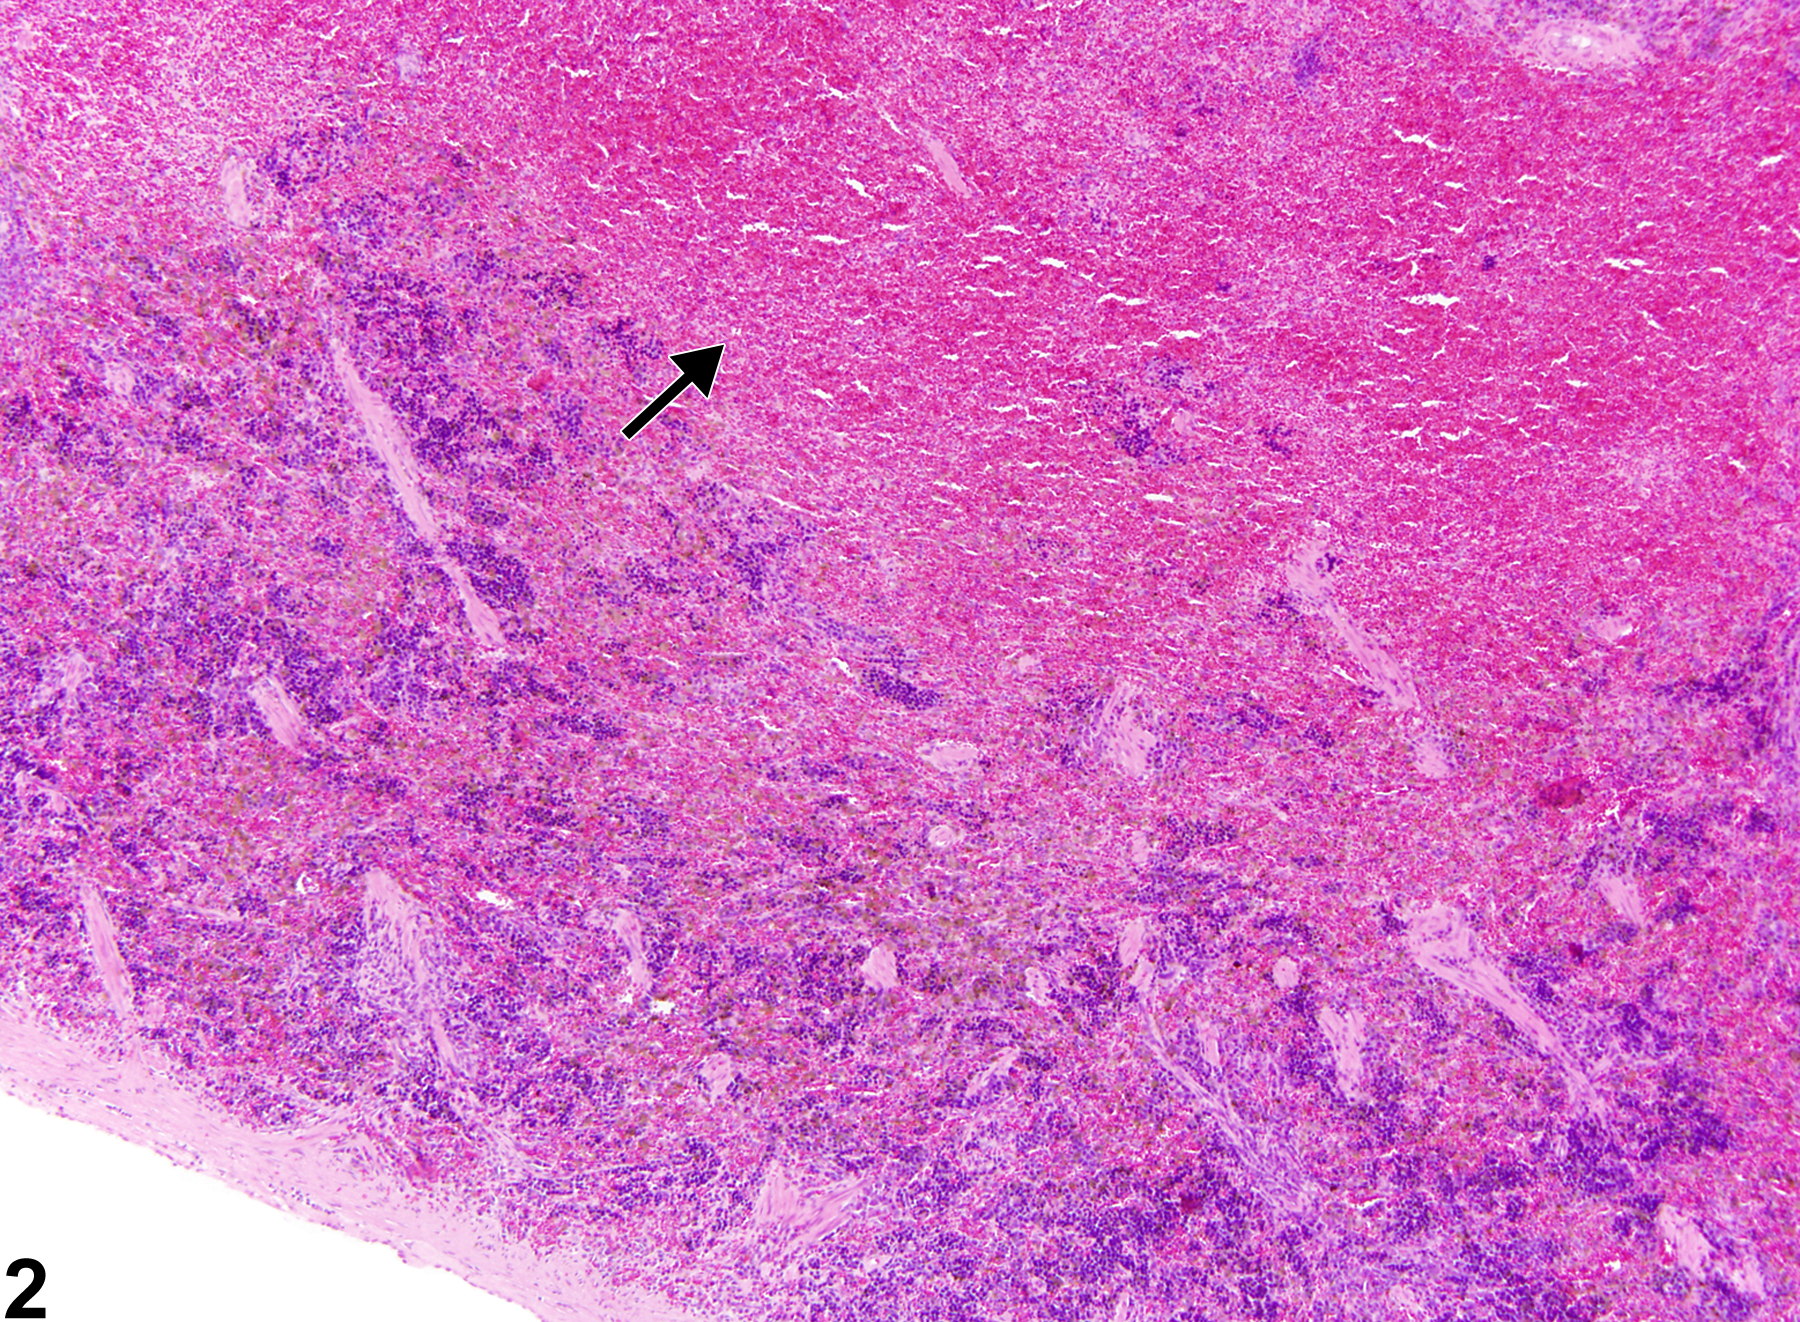 Image of hemorrhage in the spleen from a female F344/N rat in a chronic study